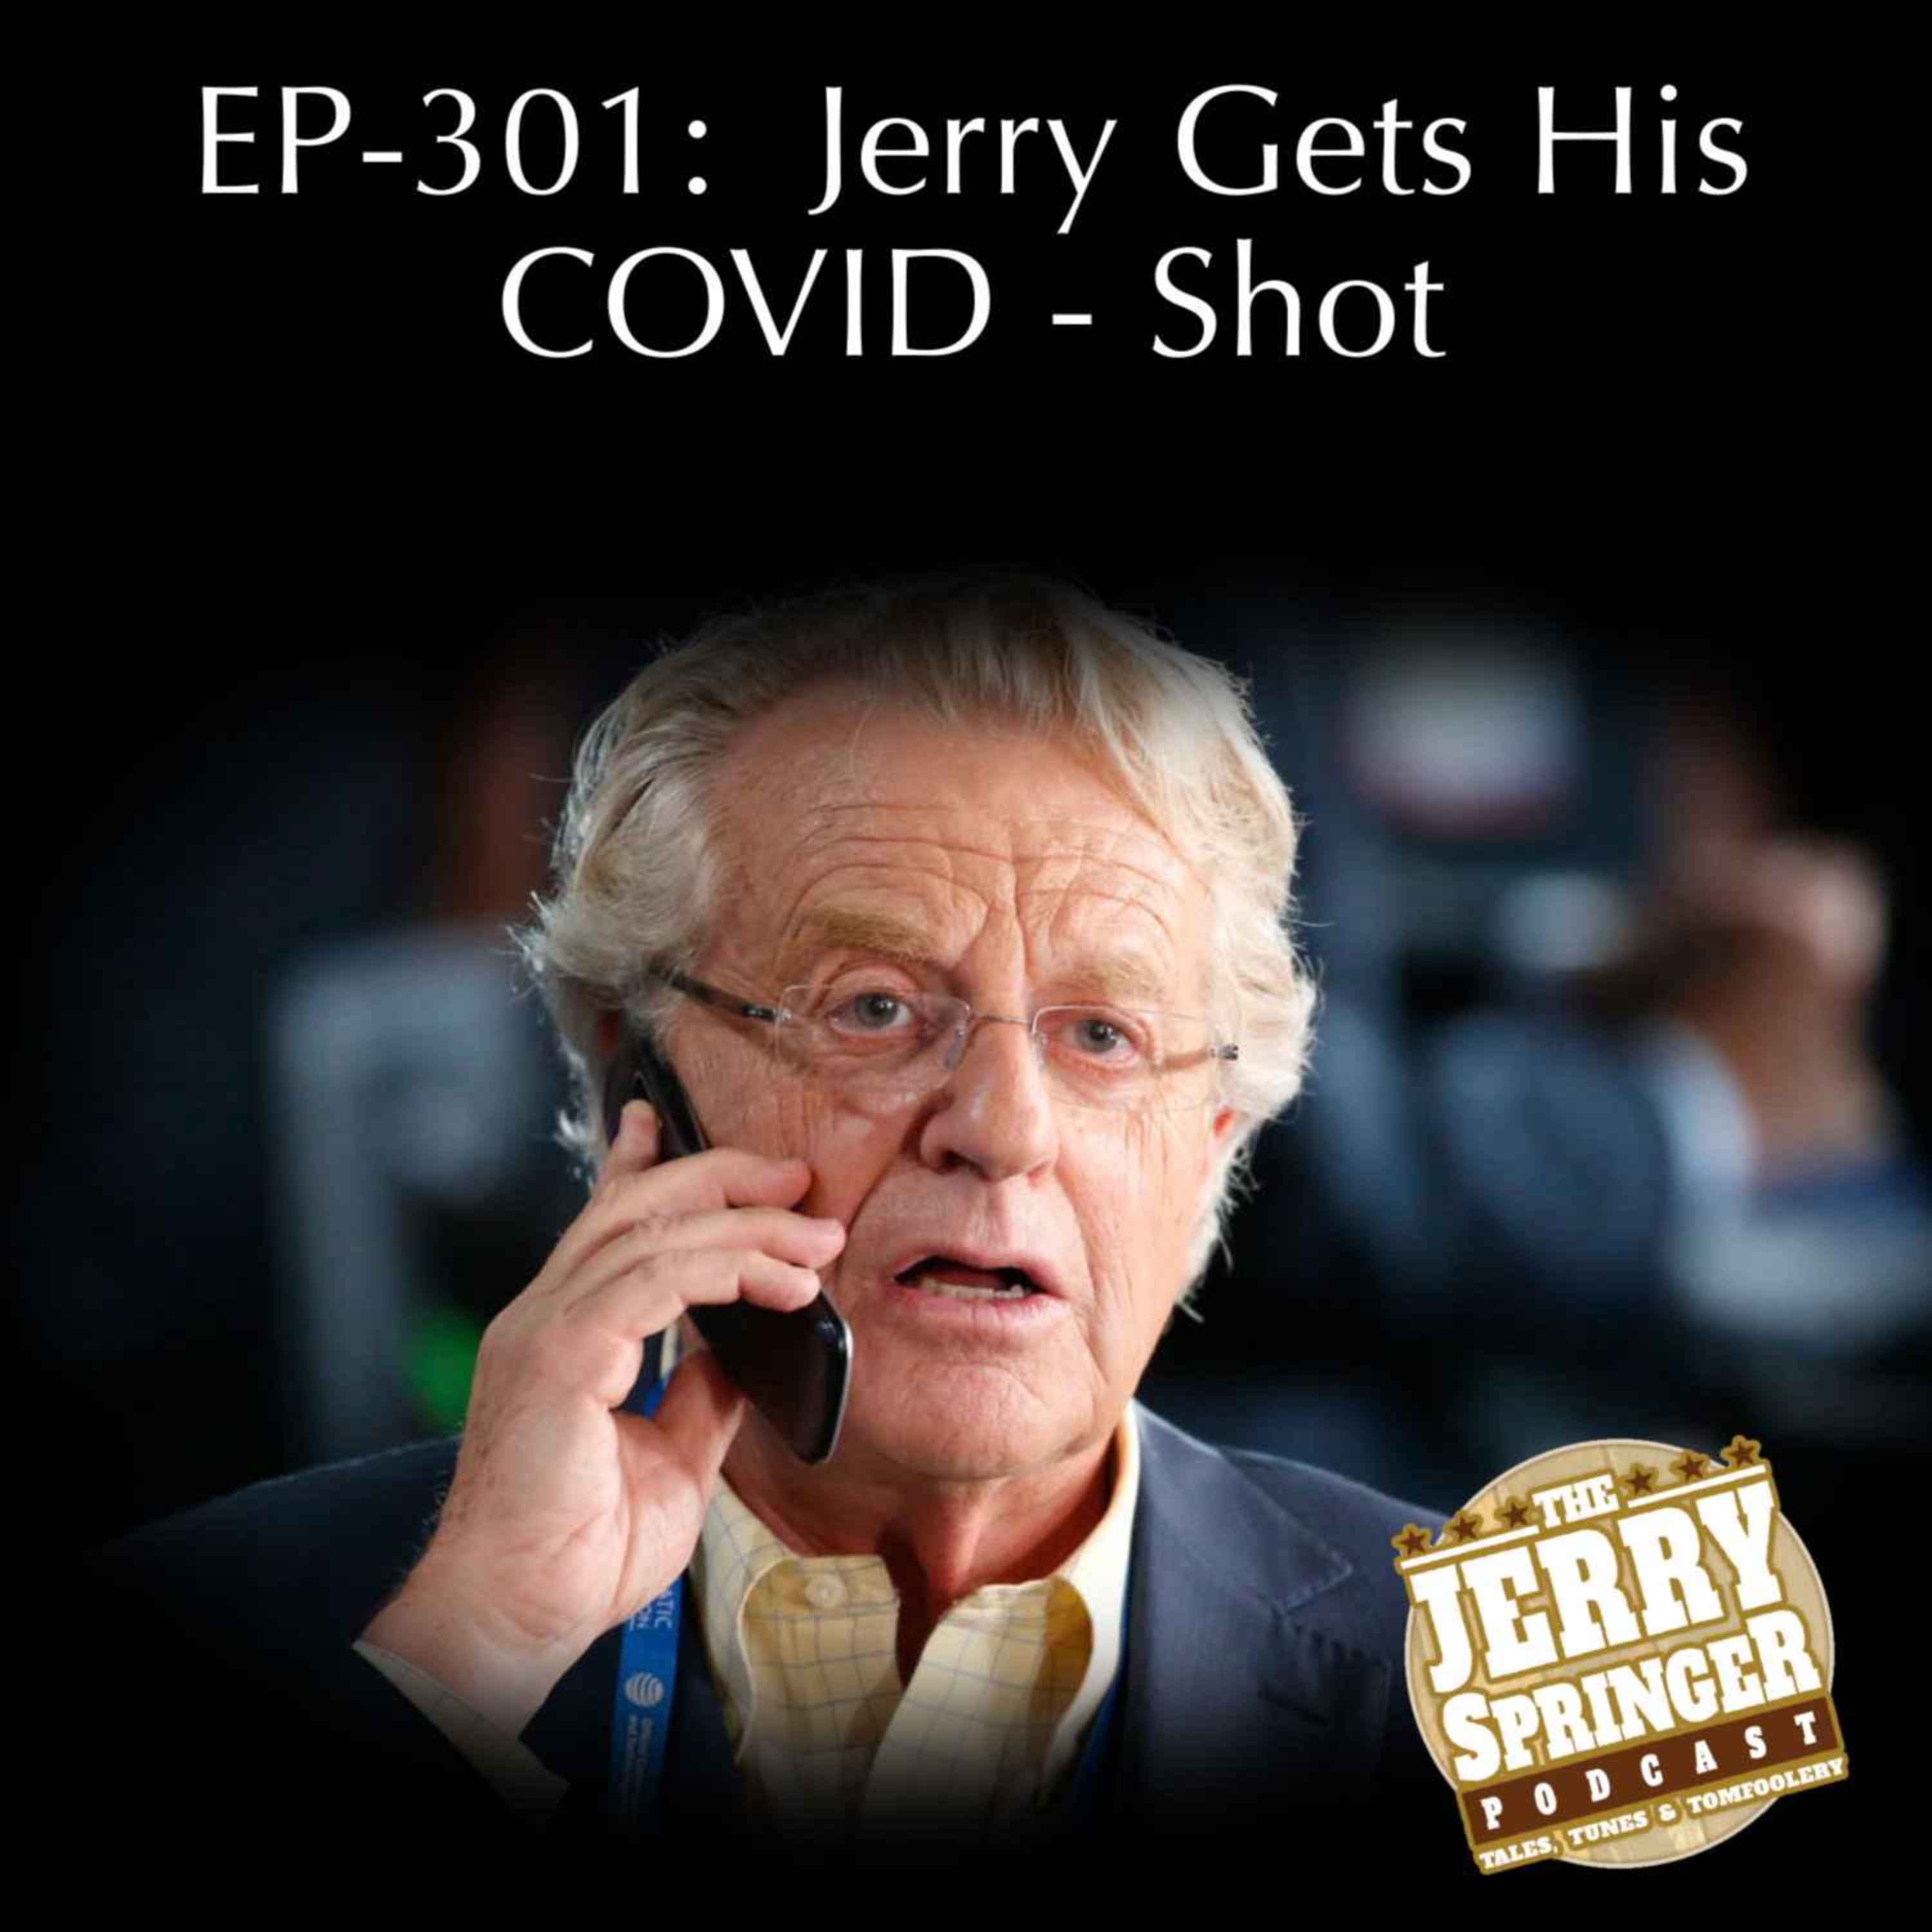 Jerry Gets His COVID - Shot: EP 301